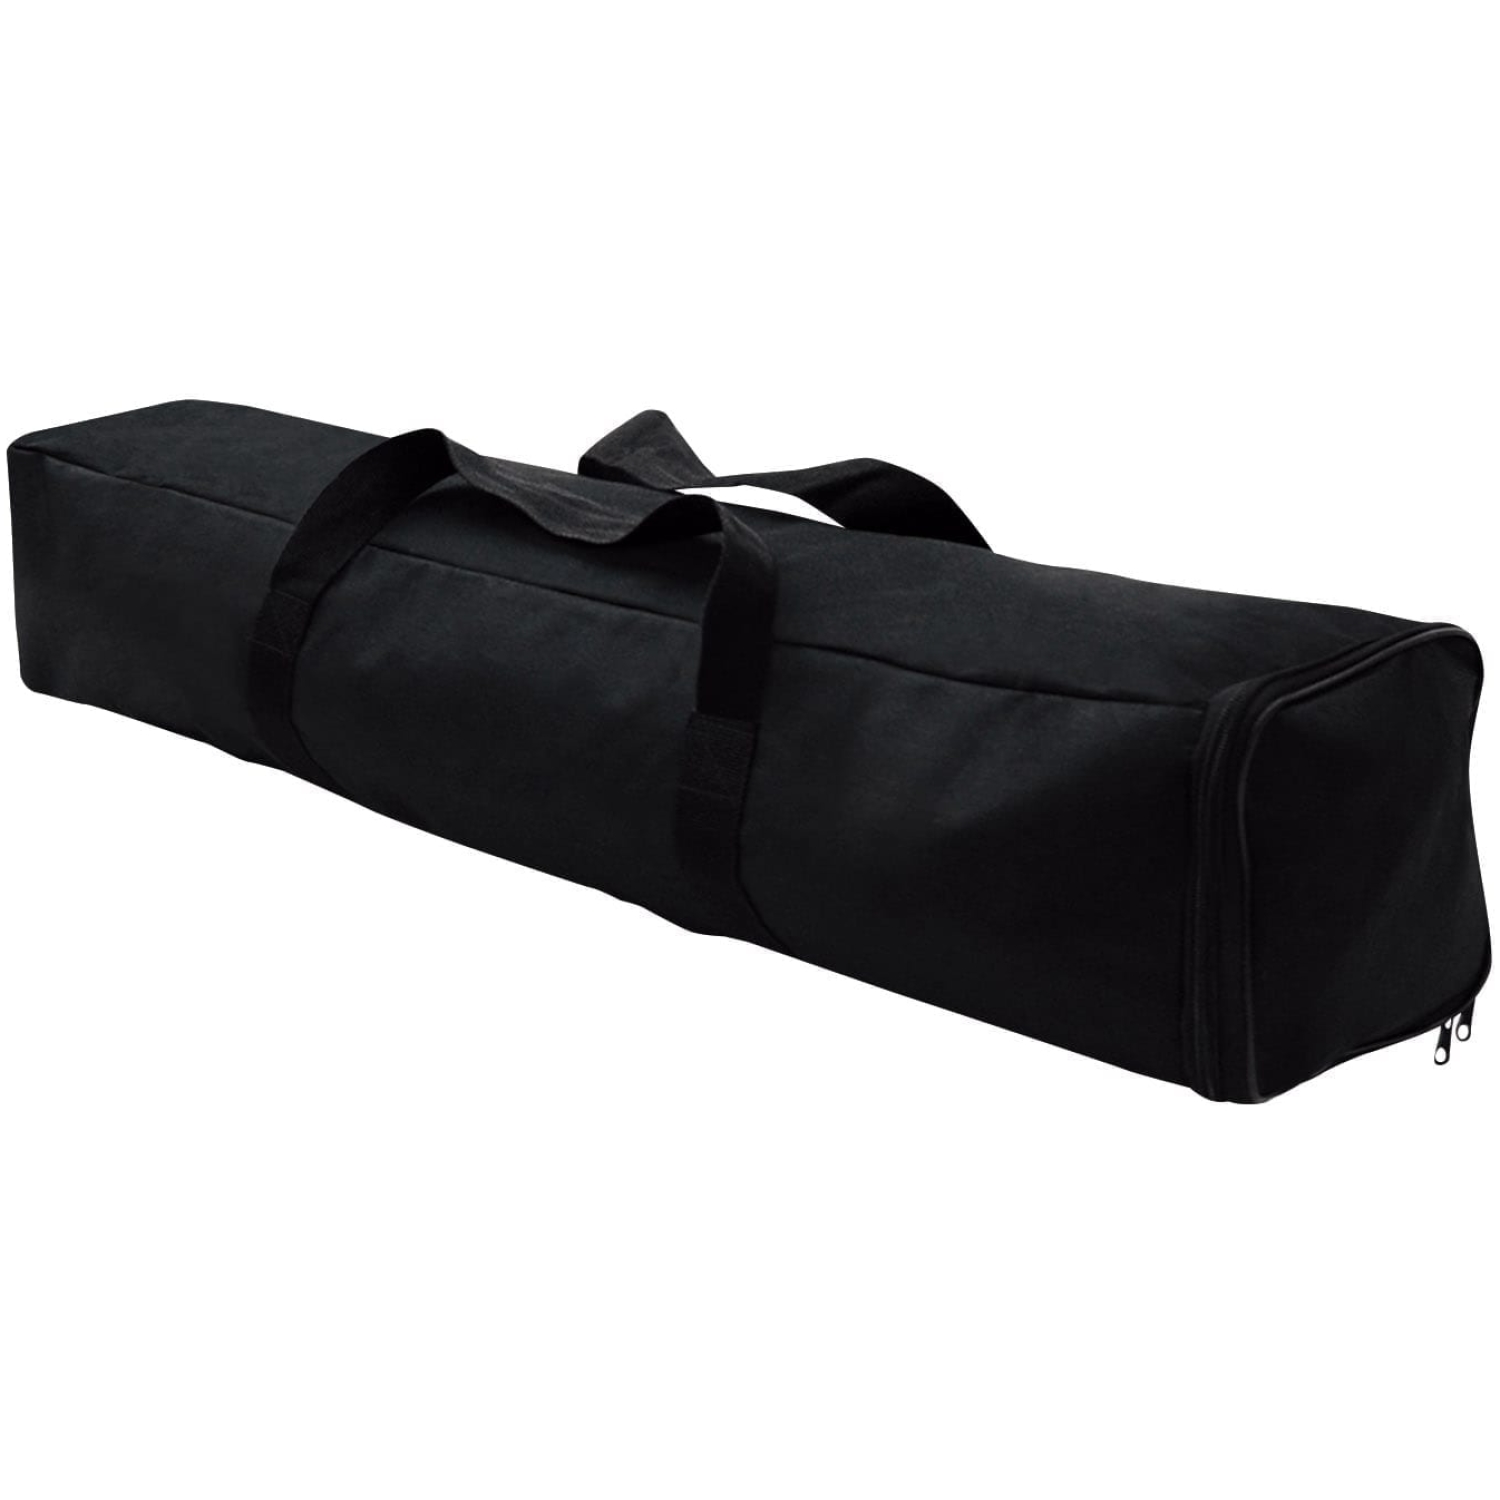 31.5″ Soft Carry Case For Fabric Displays